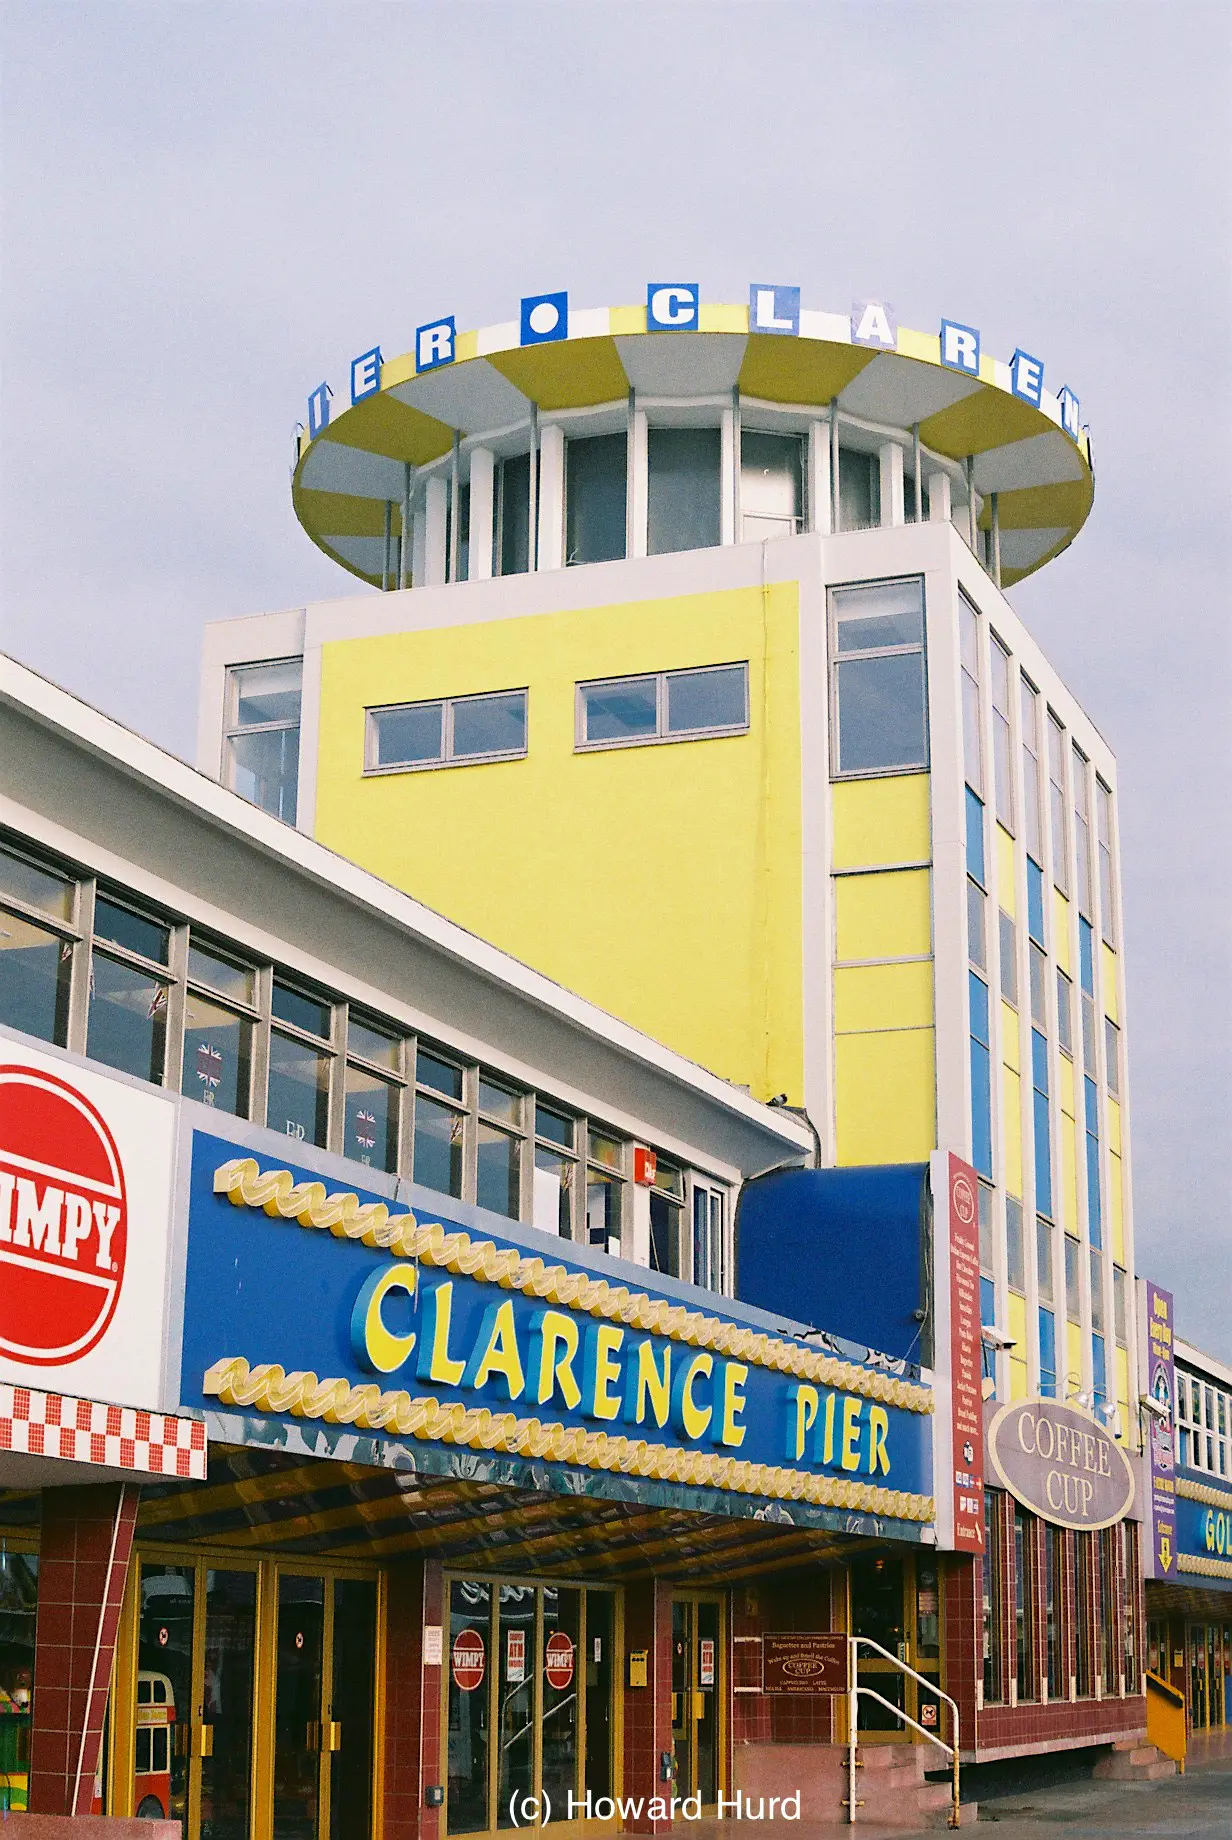 Clarence Pier in Southsea, UK - taken with Fed4 and Agfa VistaPlus at ISO200